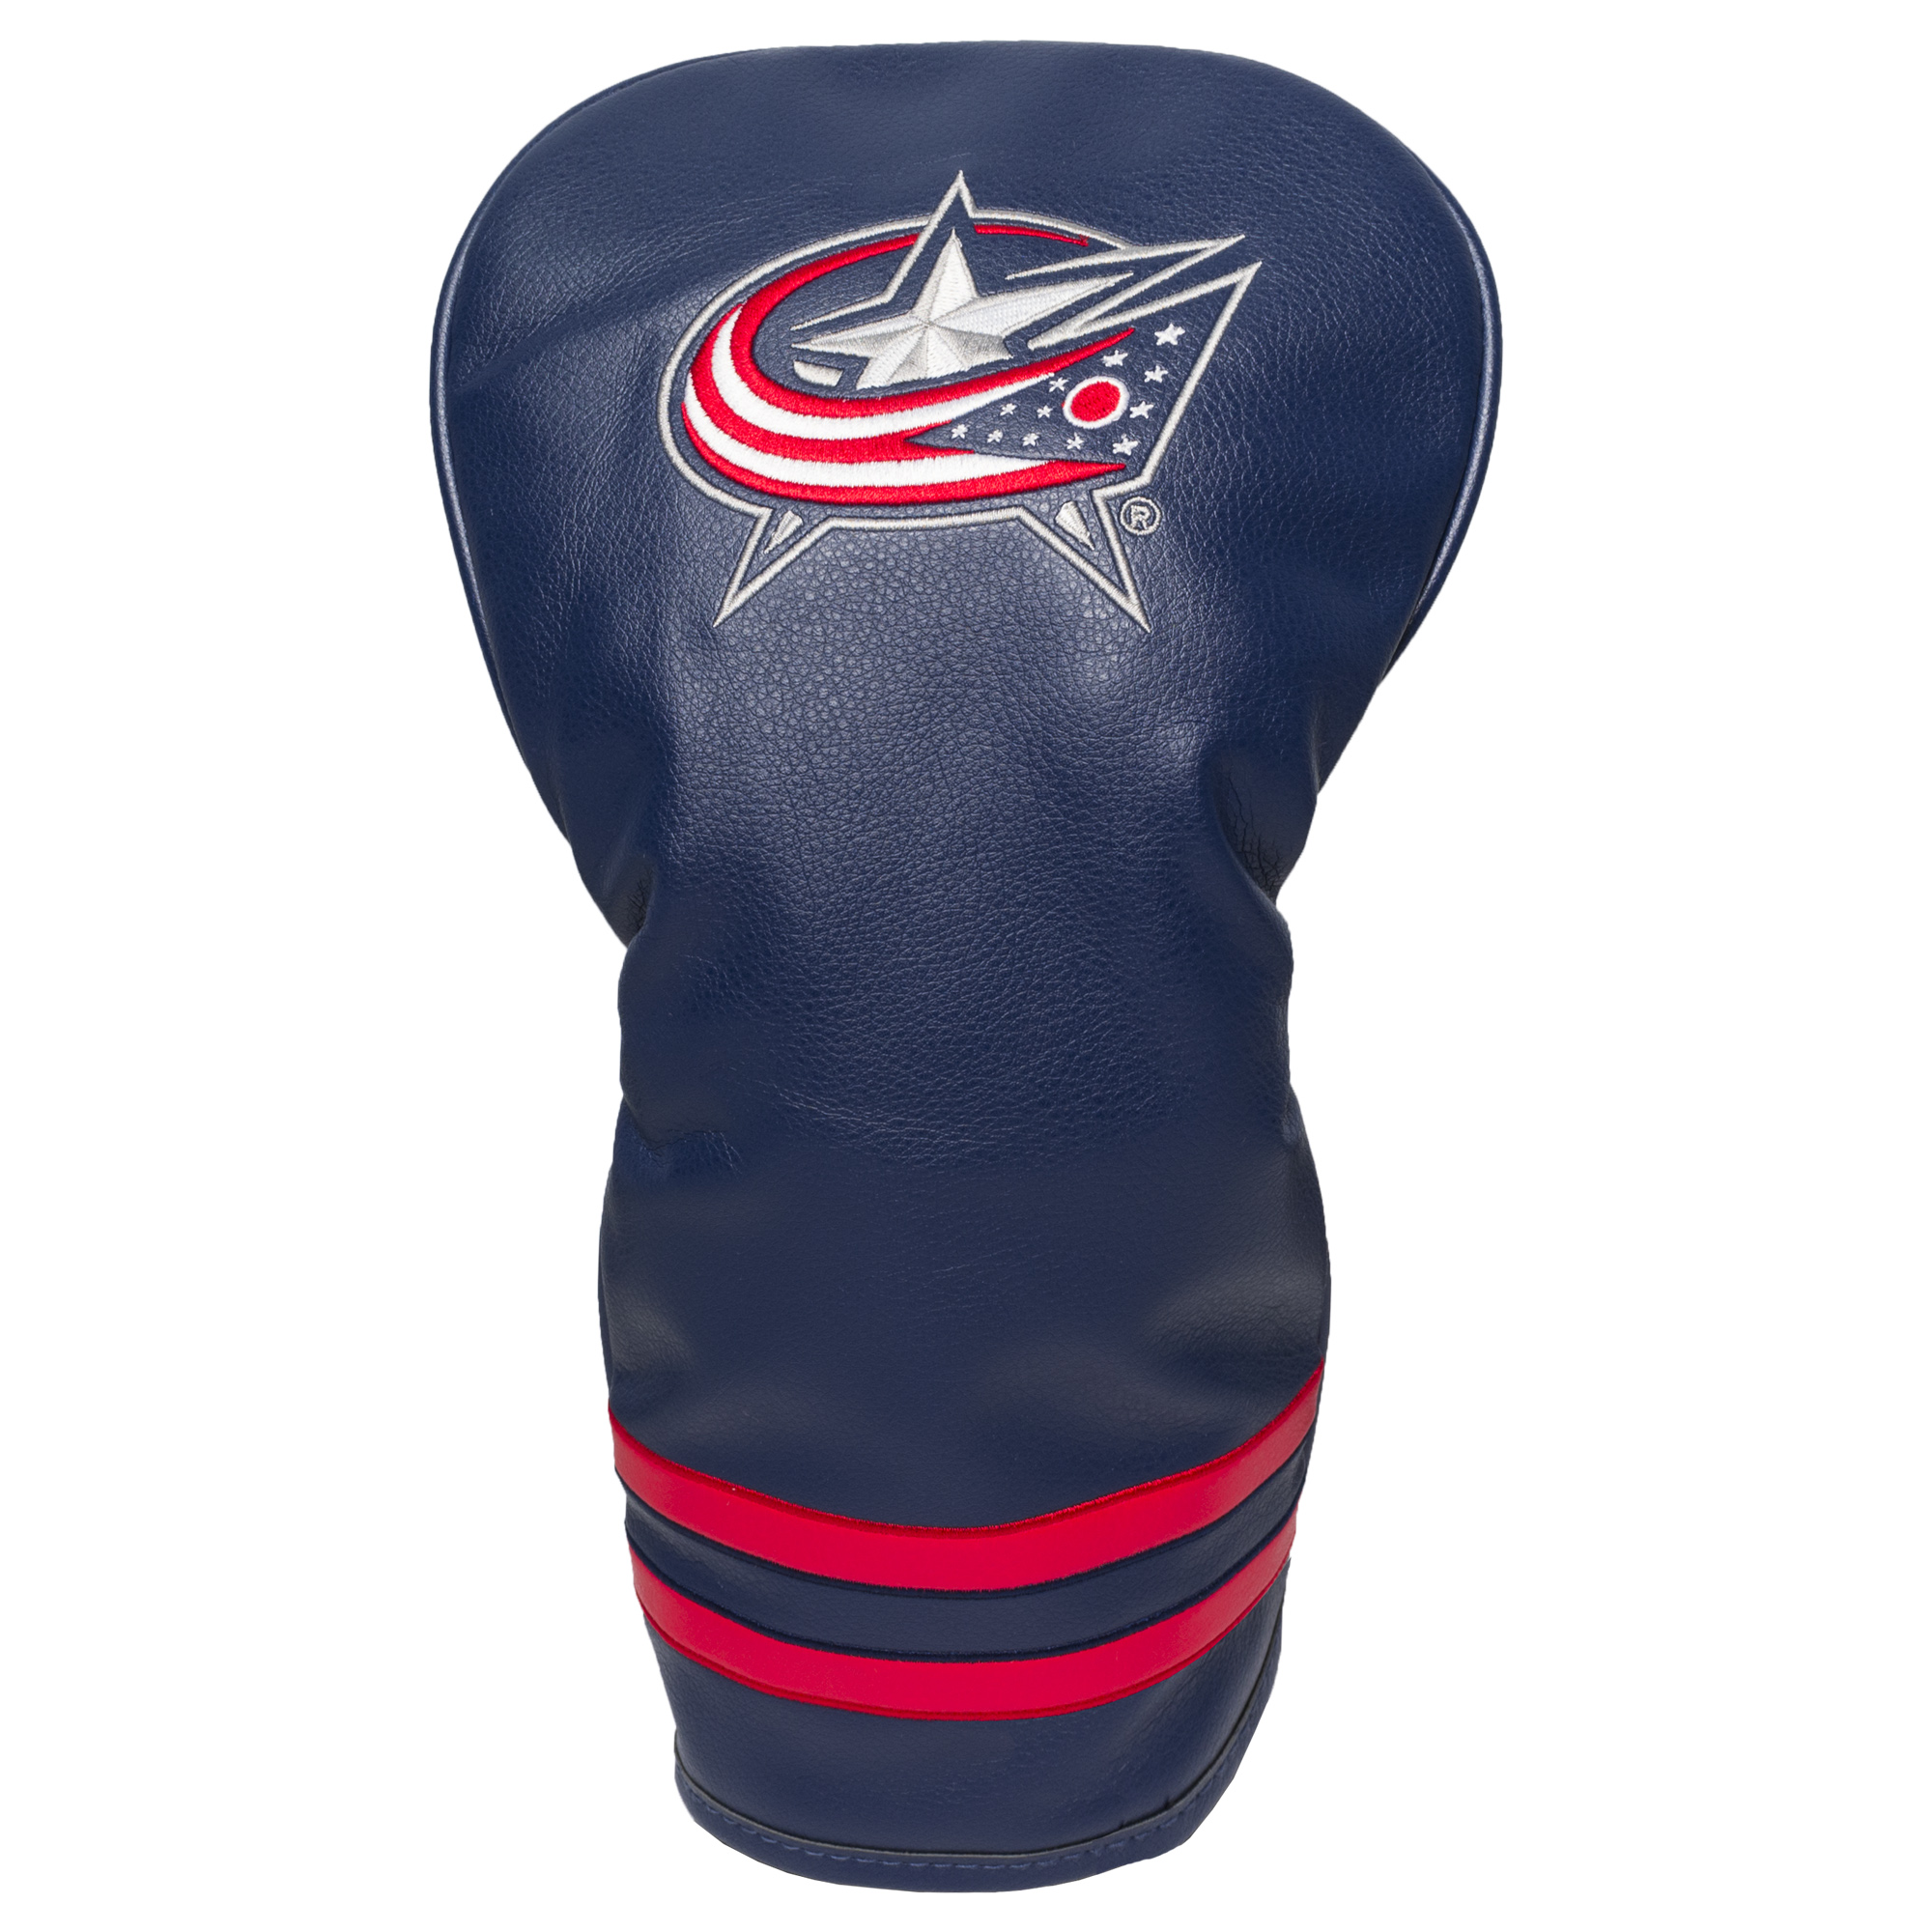 Columbus Blue Jackets Vintage Driver Headcover